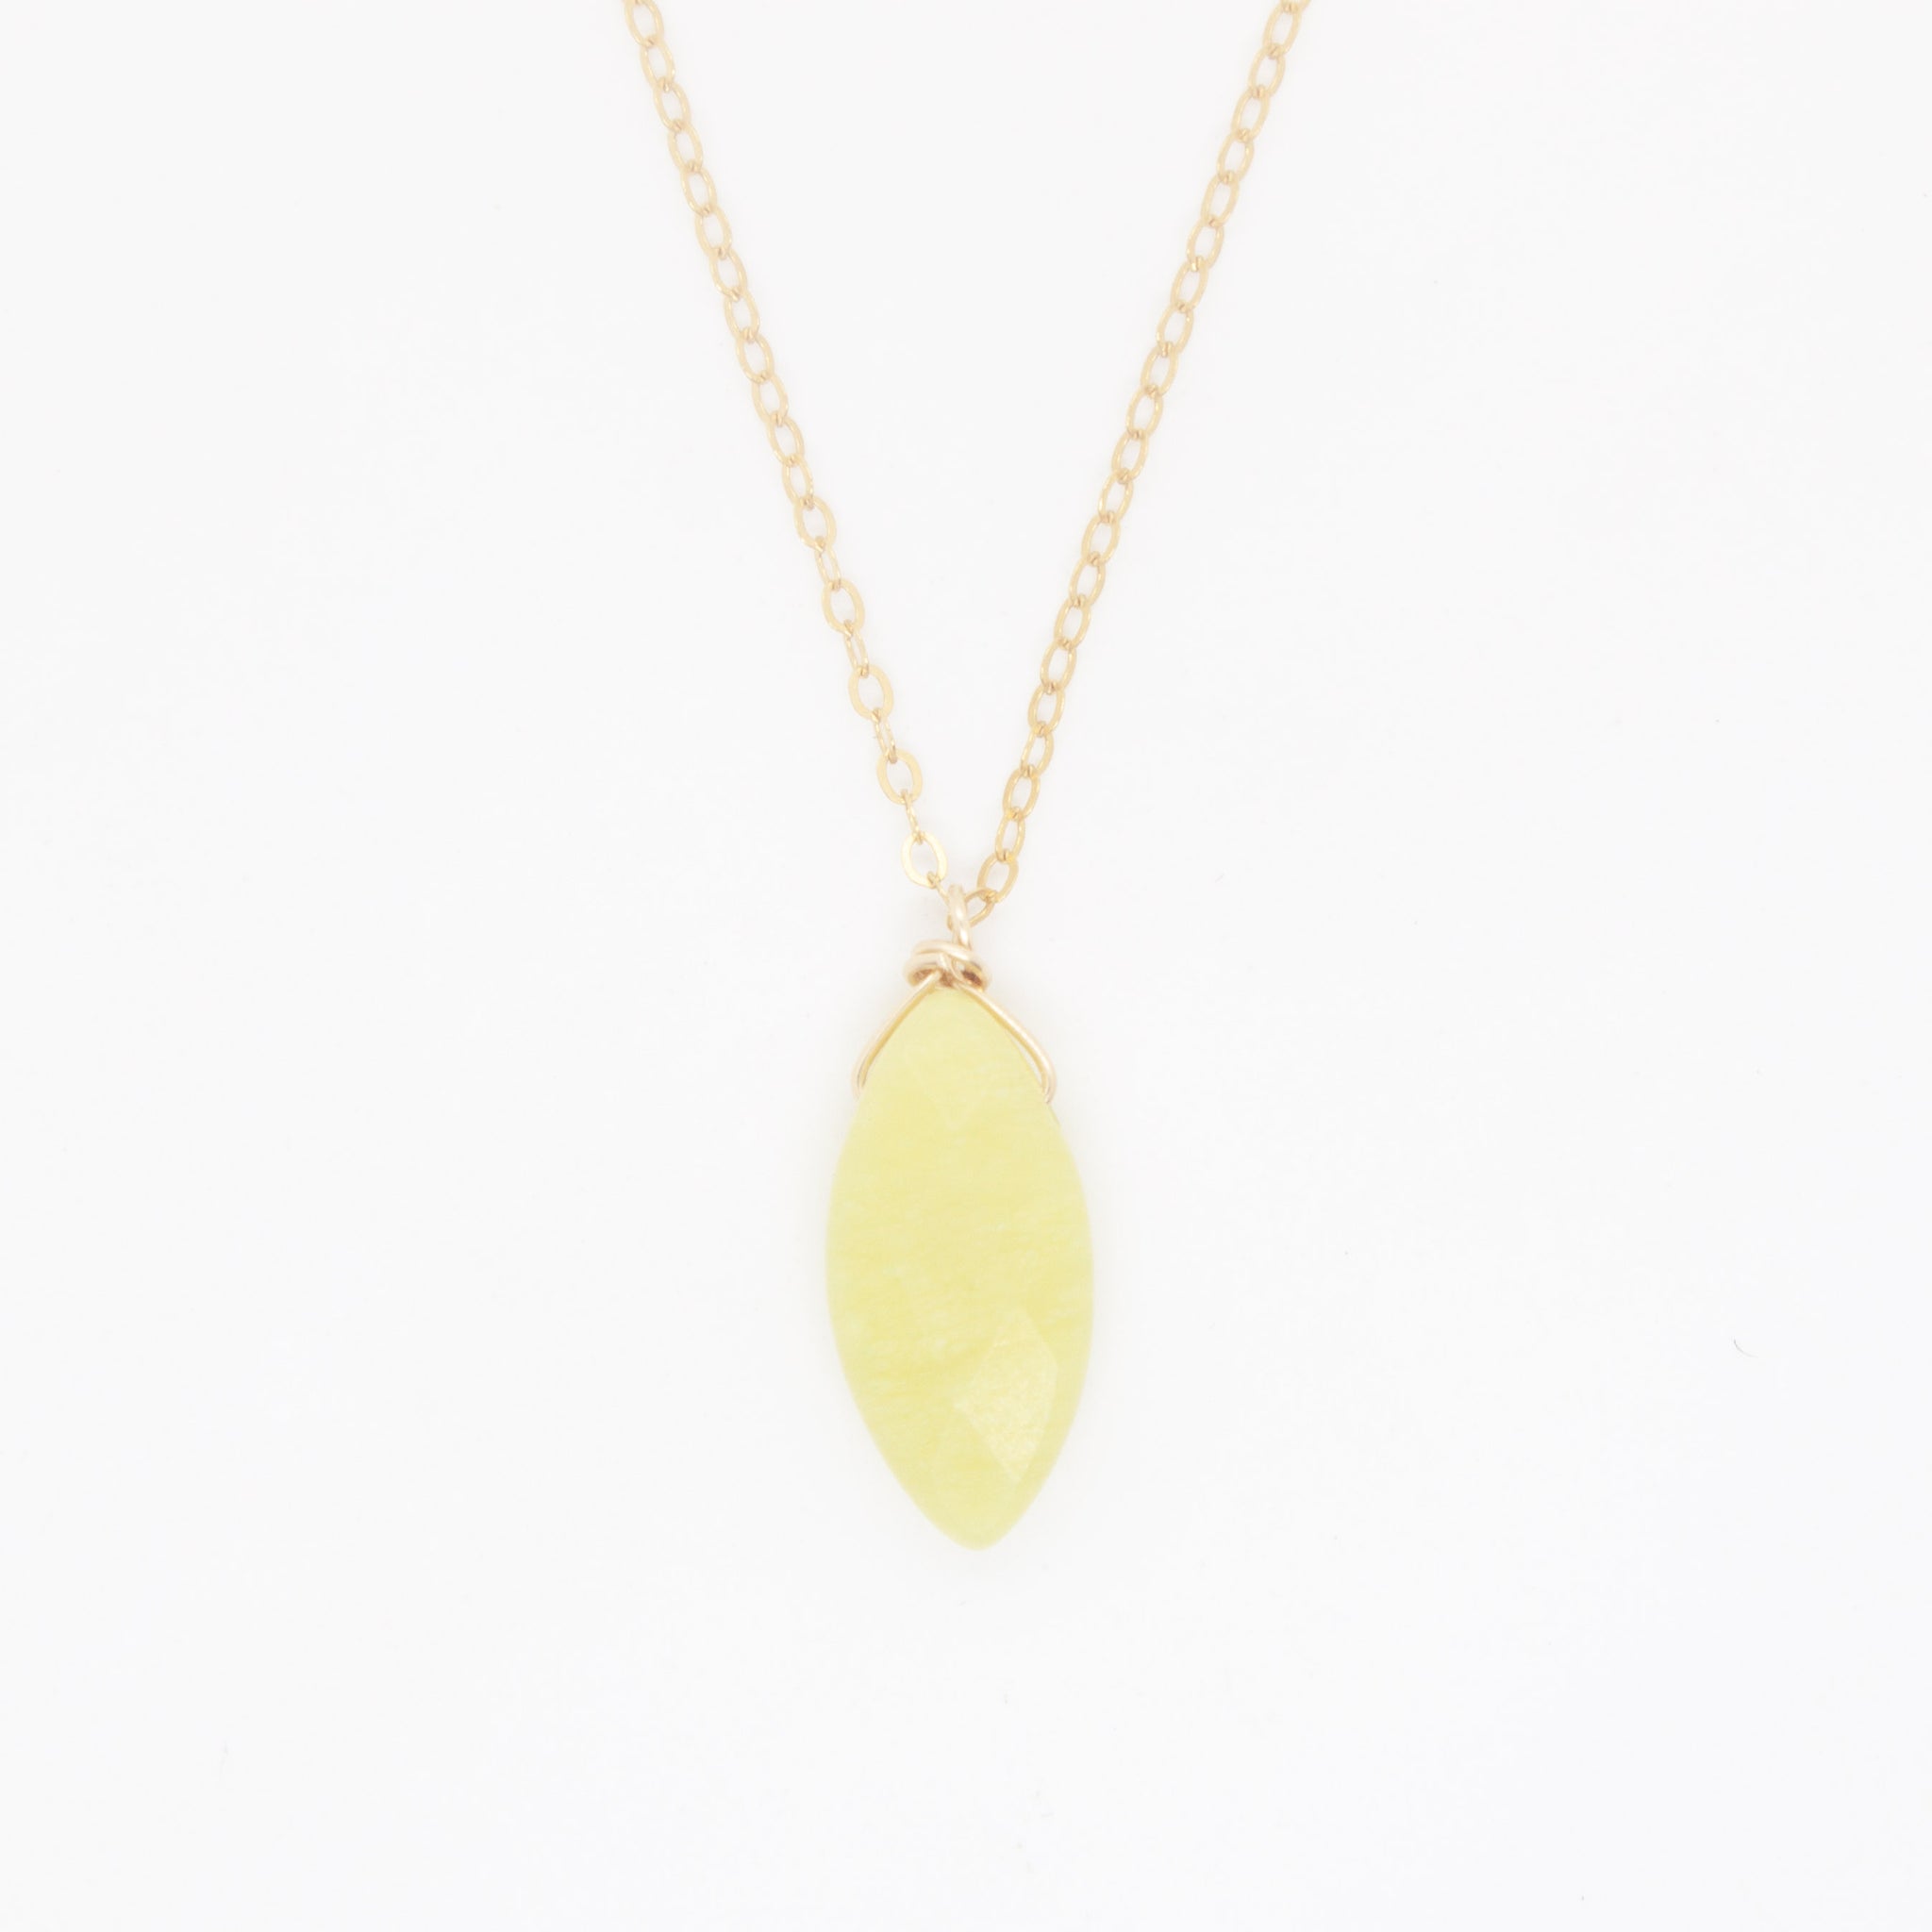 A unique 'pop' of lemon-lime colour to complement your summer whites (or blues, or pinks, or yellows....)! Gold filled necklace with olive jade charm, wrapped in 14 karat gold wire. Handmade in Toronto by kp jewelry co.